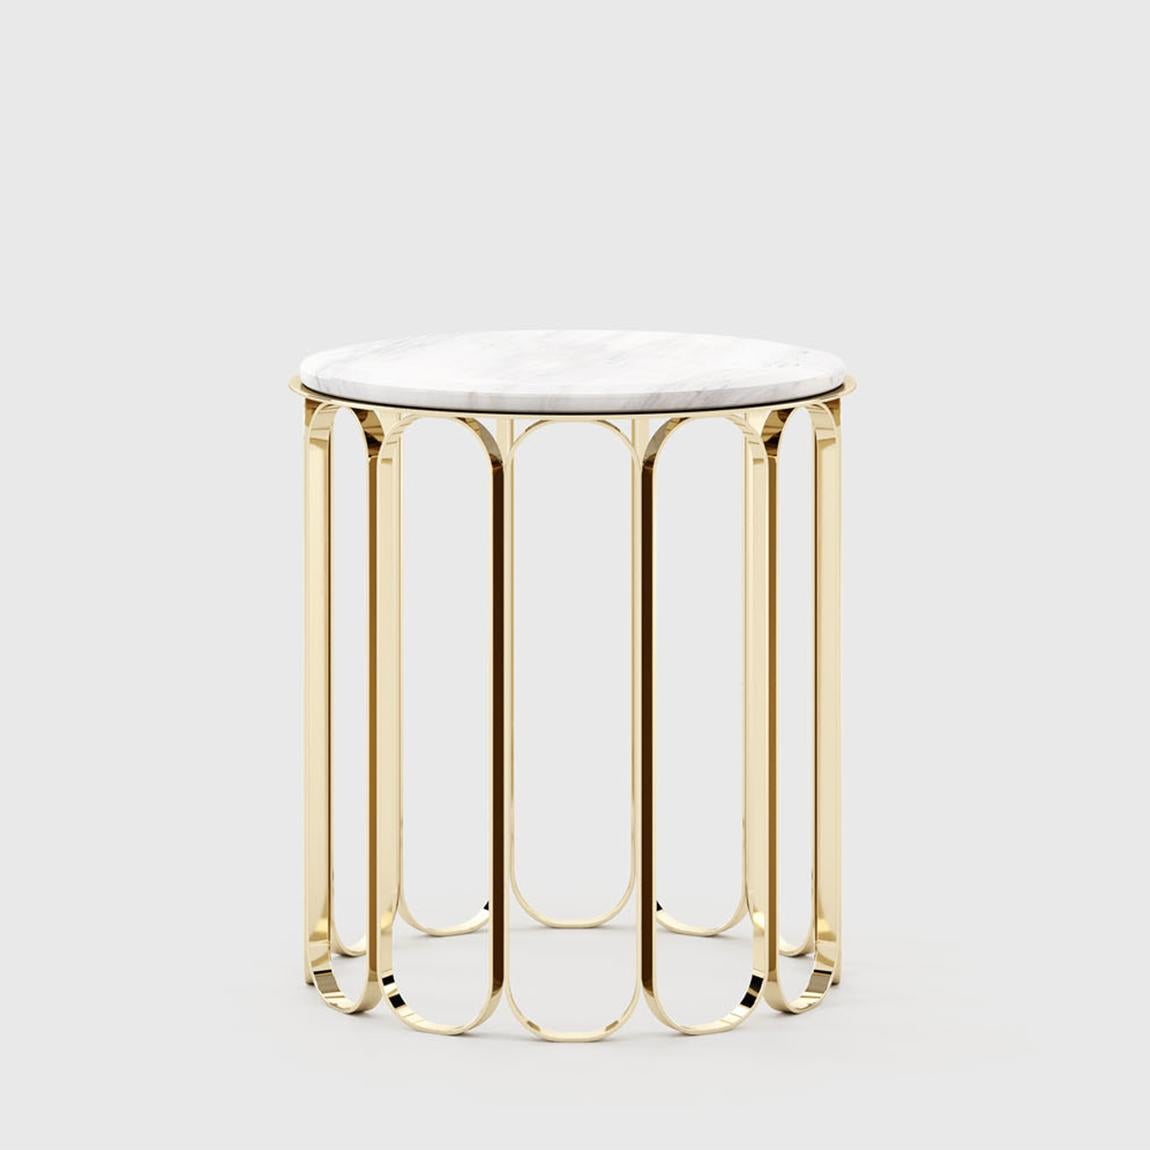 Side table cartouche with polished stainless steel base in
gold finish. With with matte polished white Estremoz marble top.